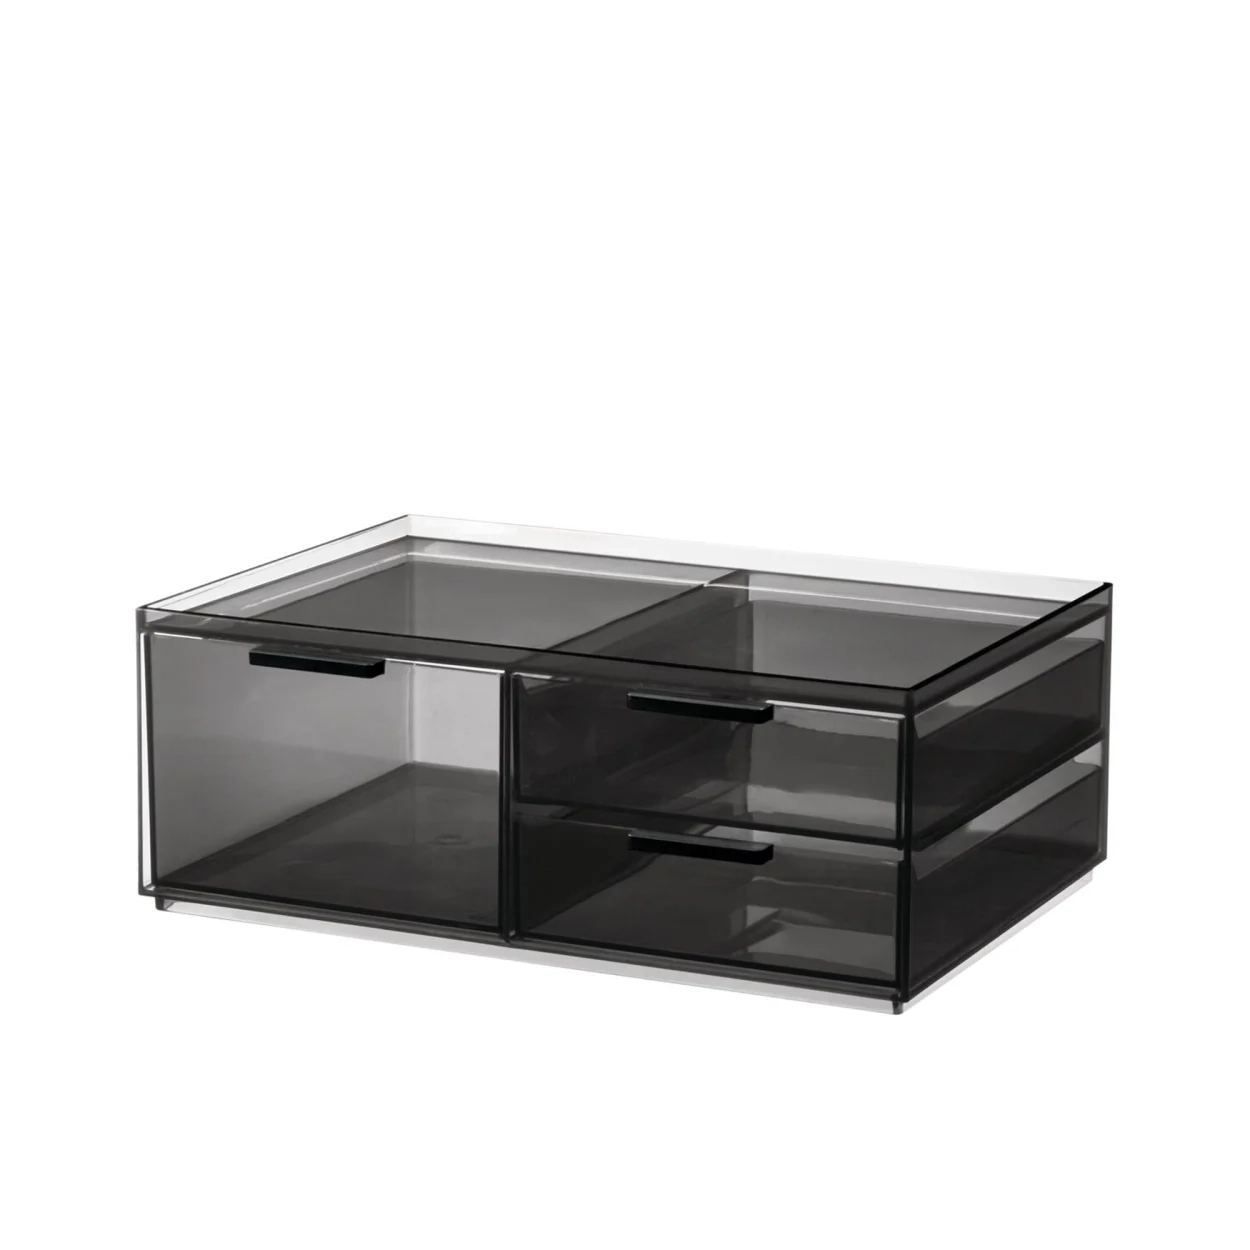 Sarah Tanno by iDesign 3 Drawer Wide Cosmetic Organiser Clear Image 1